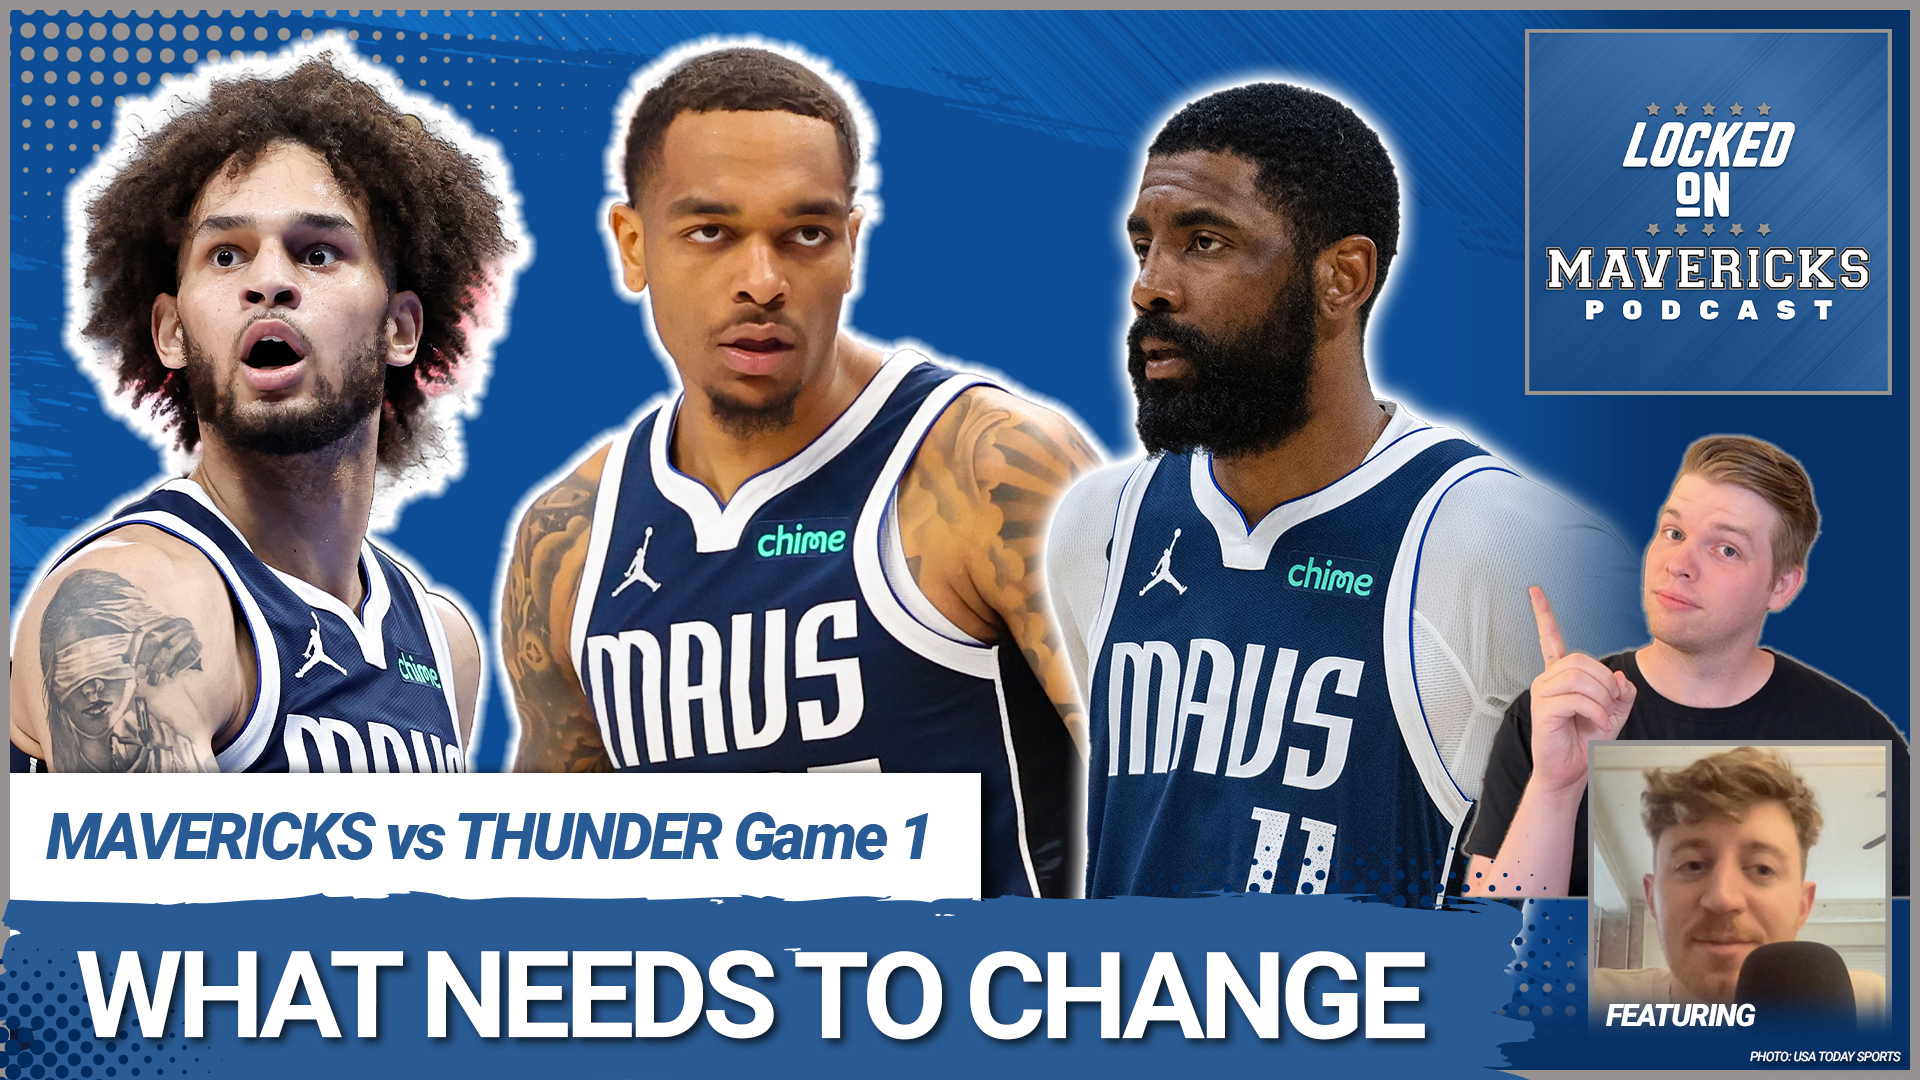 Nick Angstadt is joined by Tim Cato to breakdown the changes the Dallas Mavericks need to make from Game 1 to Game 2 against the Oklahoma City Thunder.